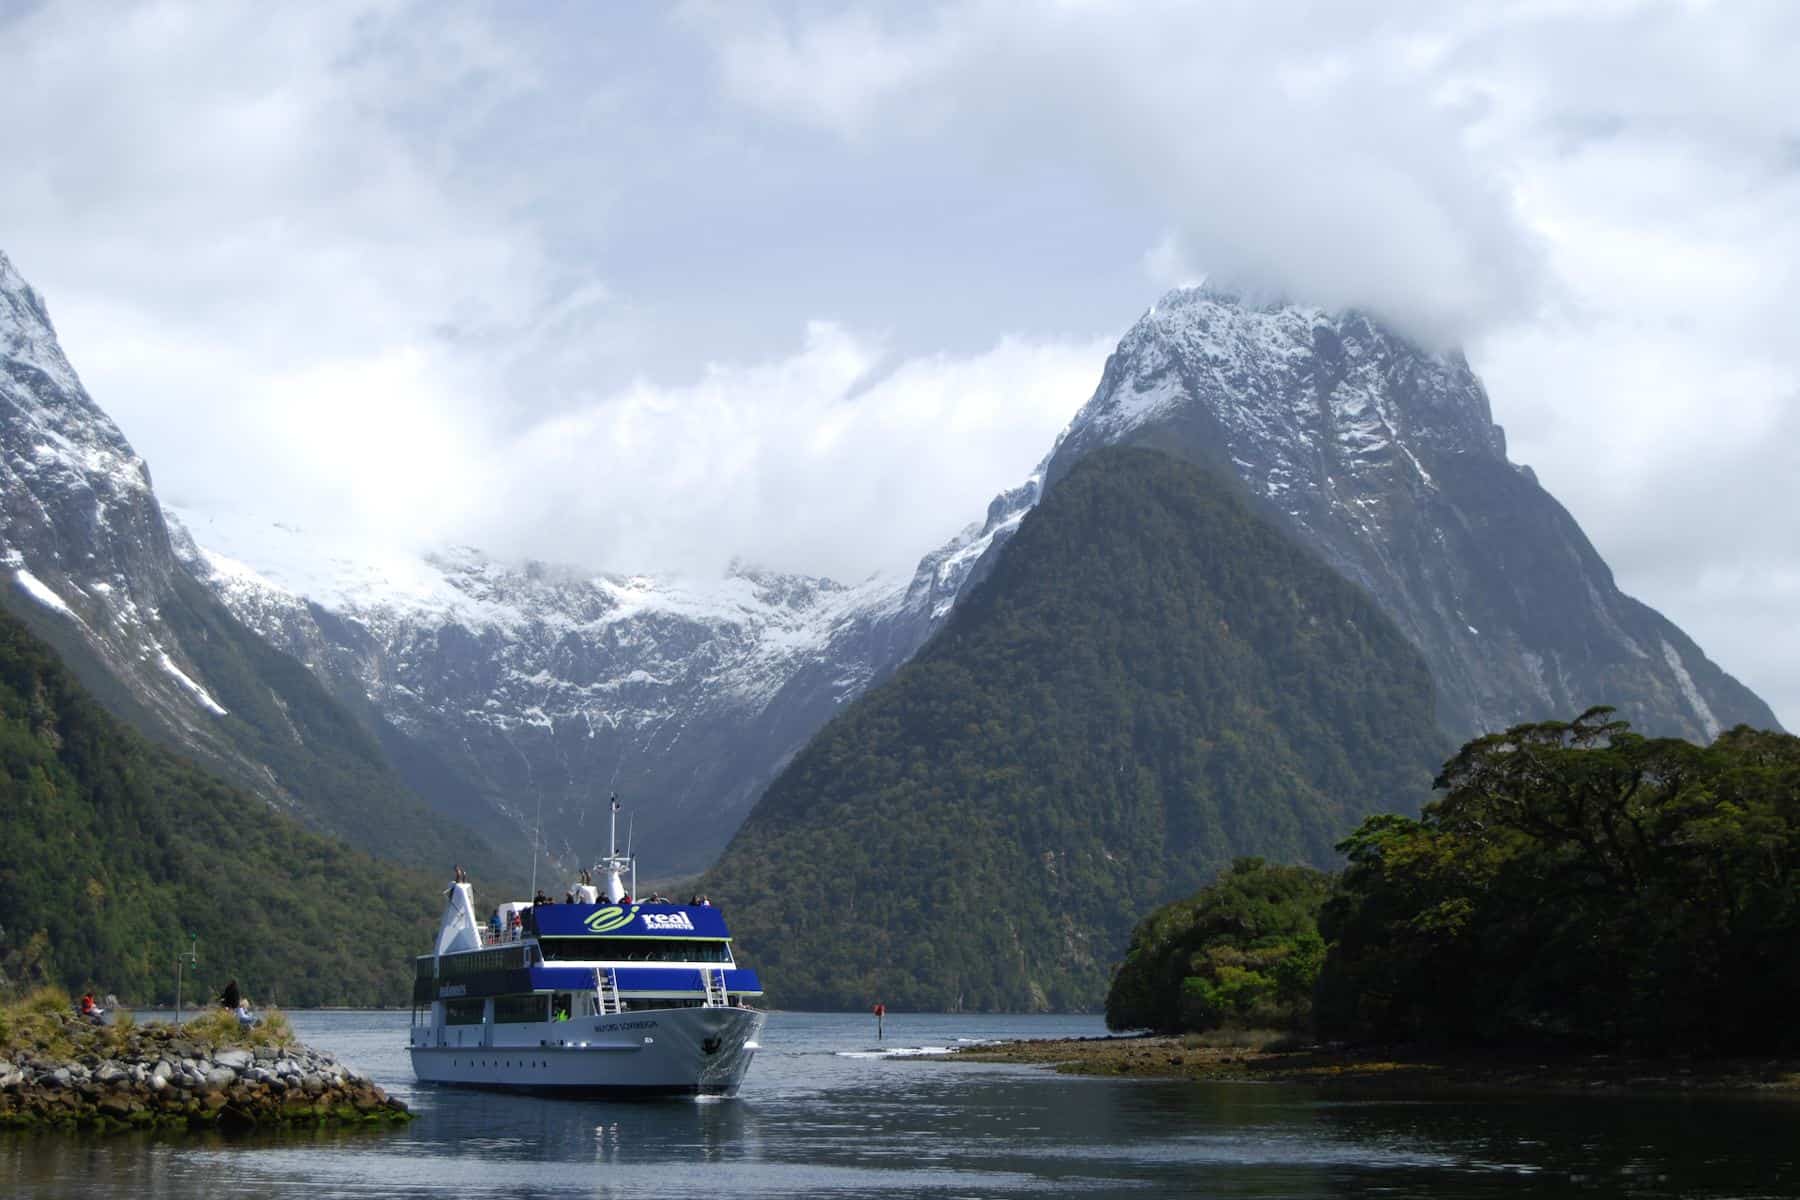 Experience Doubtful Sound with Kirra